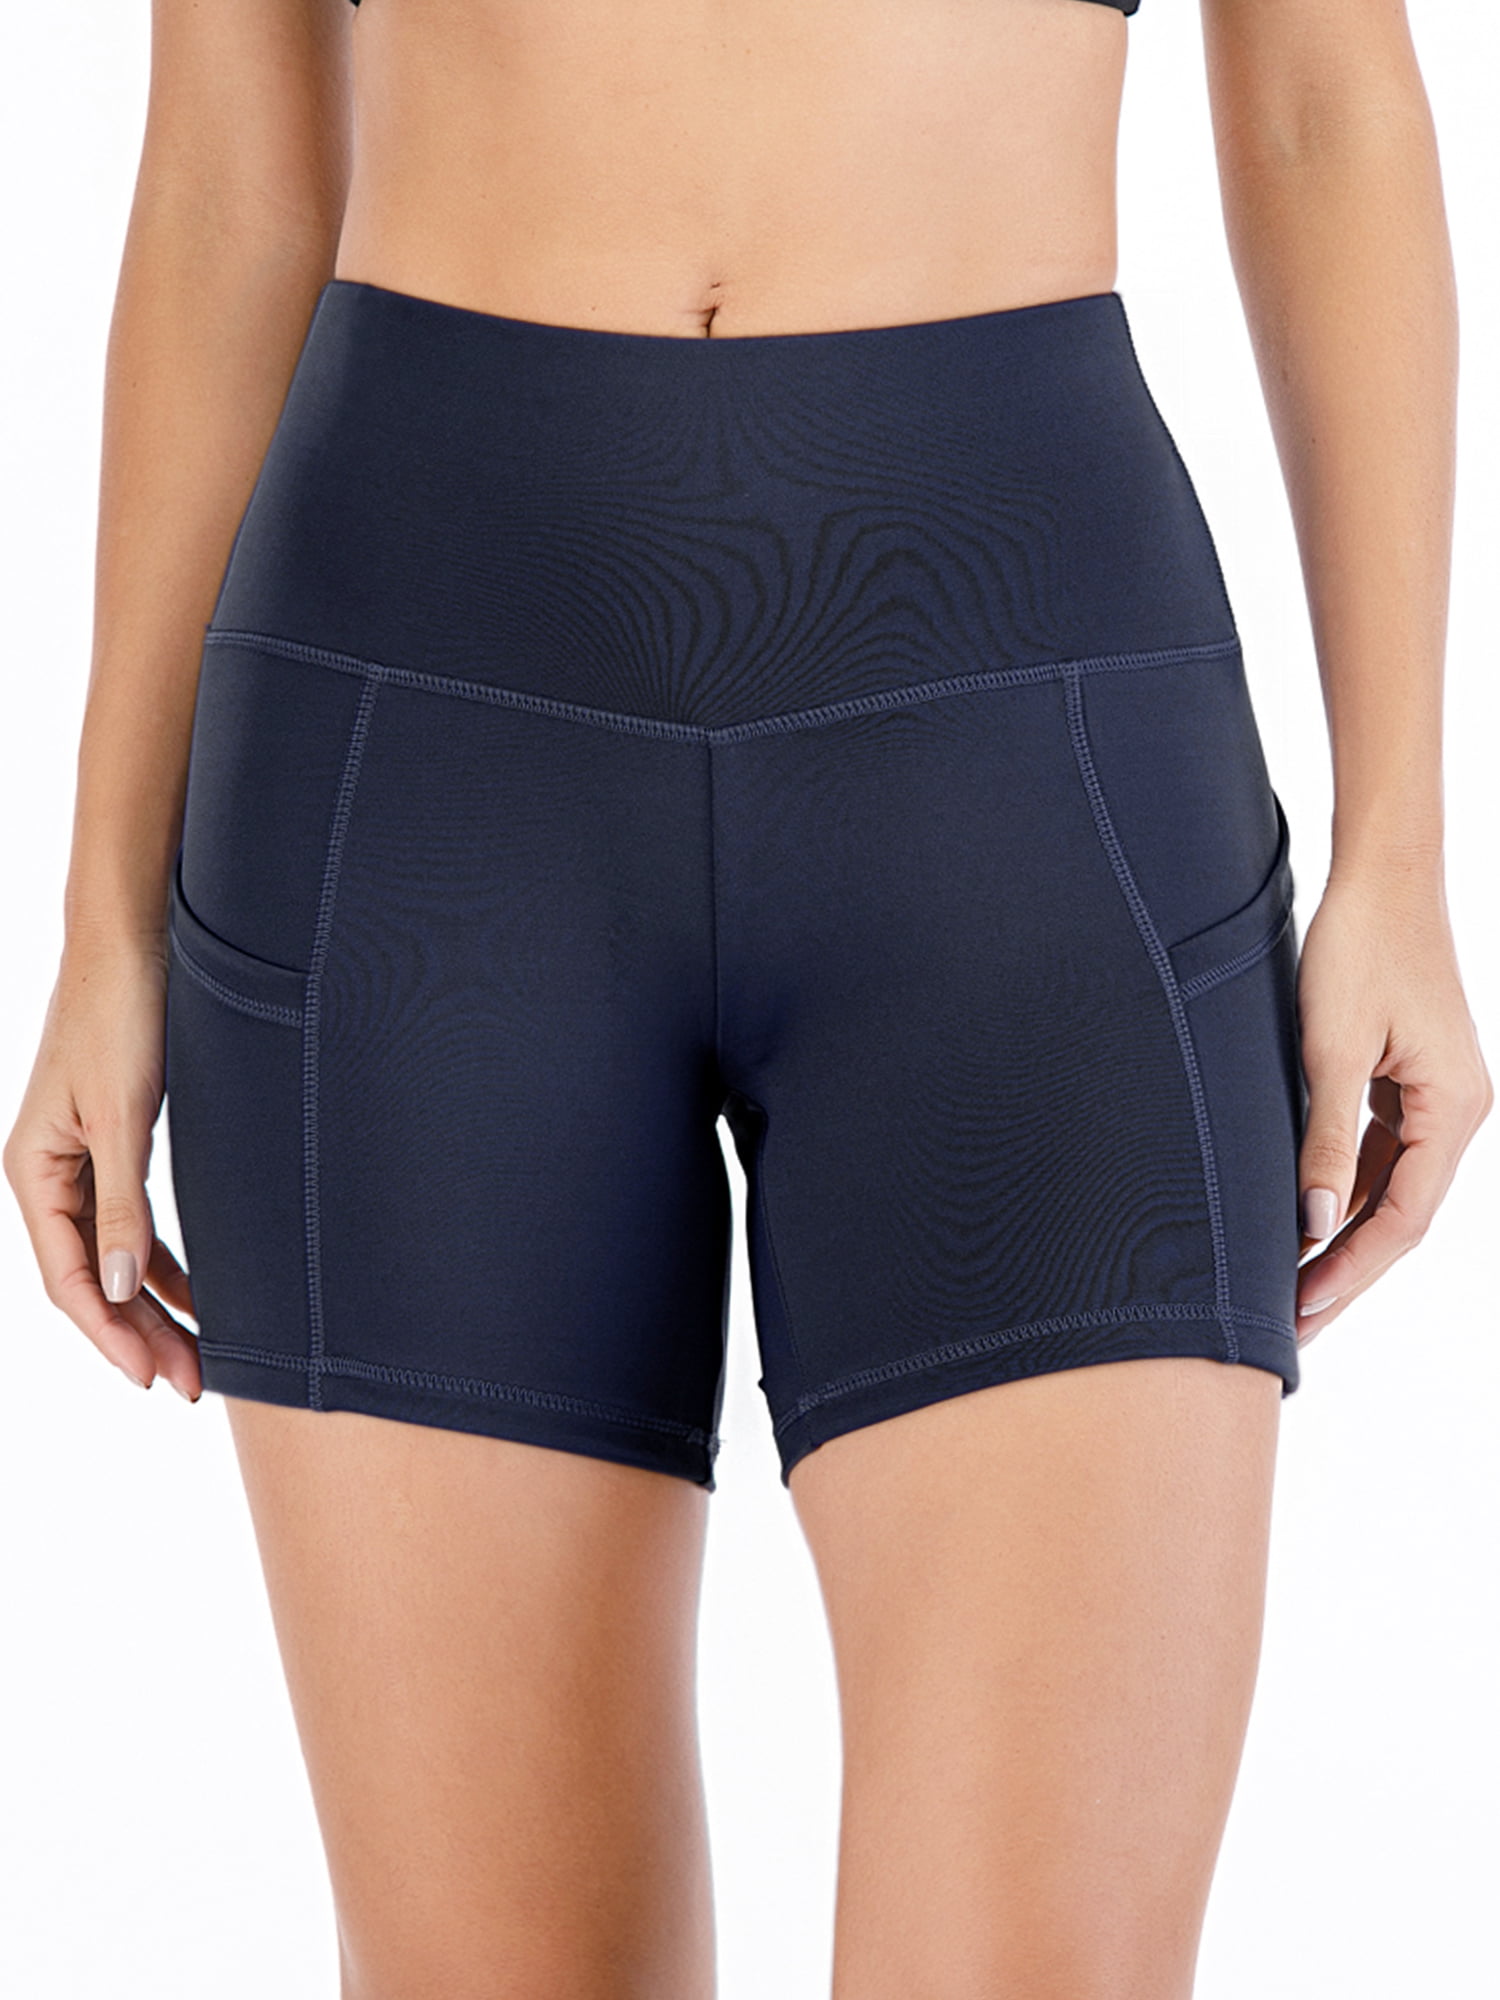 High Waist Out Pocket Yoga Short Tummy Control Workout Running Athletic Non See-Through Yoga Shorts 